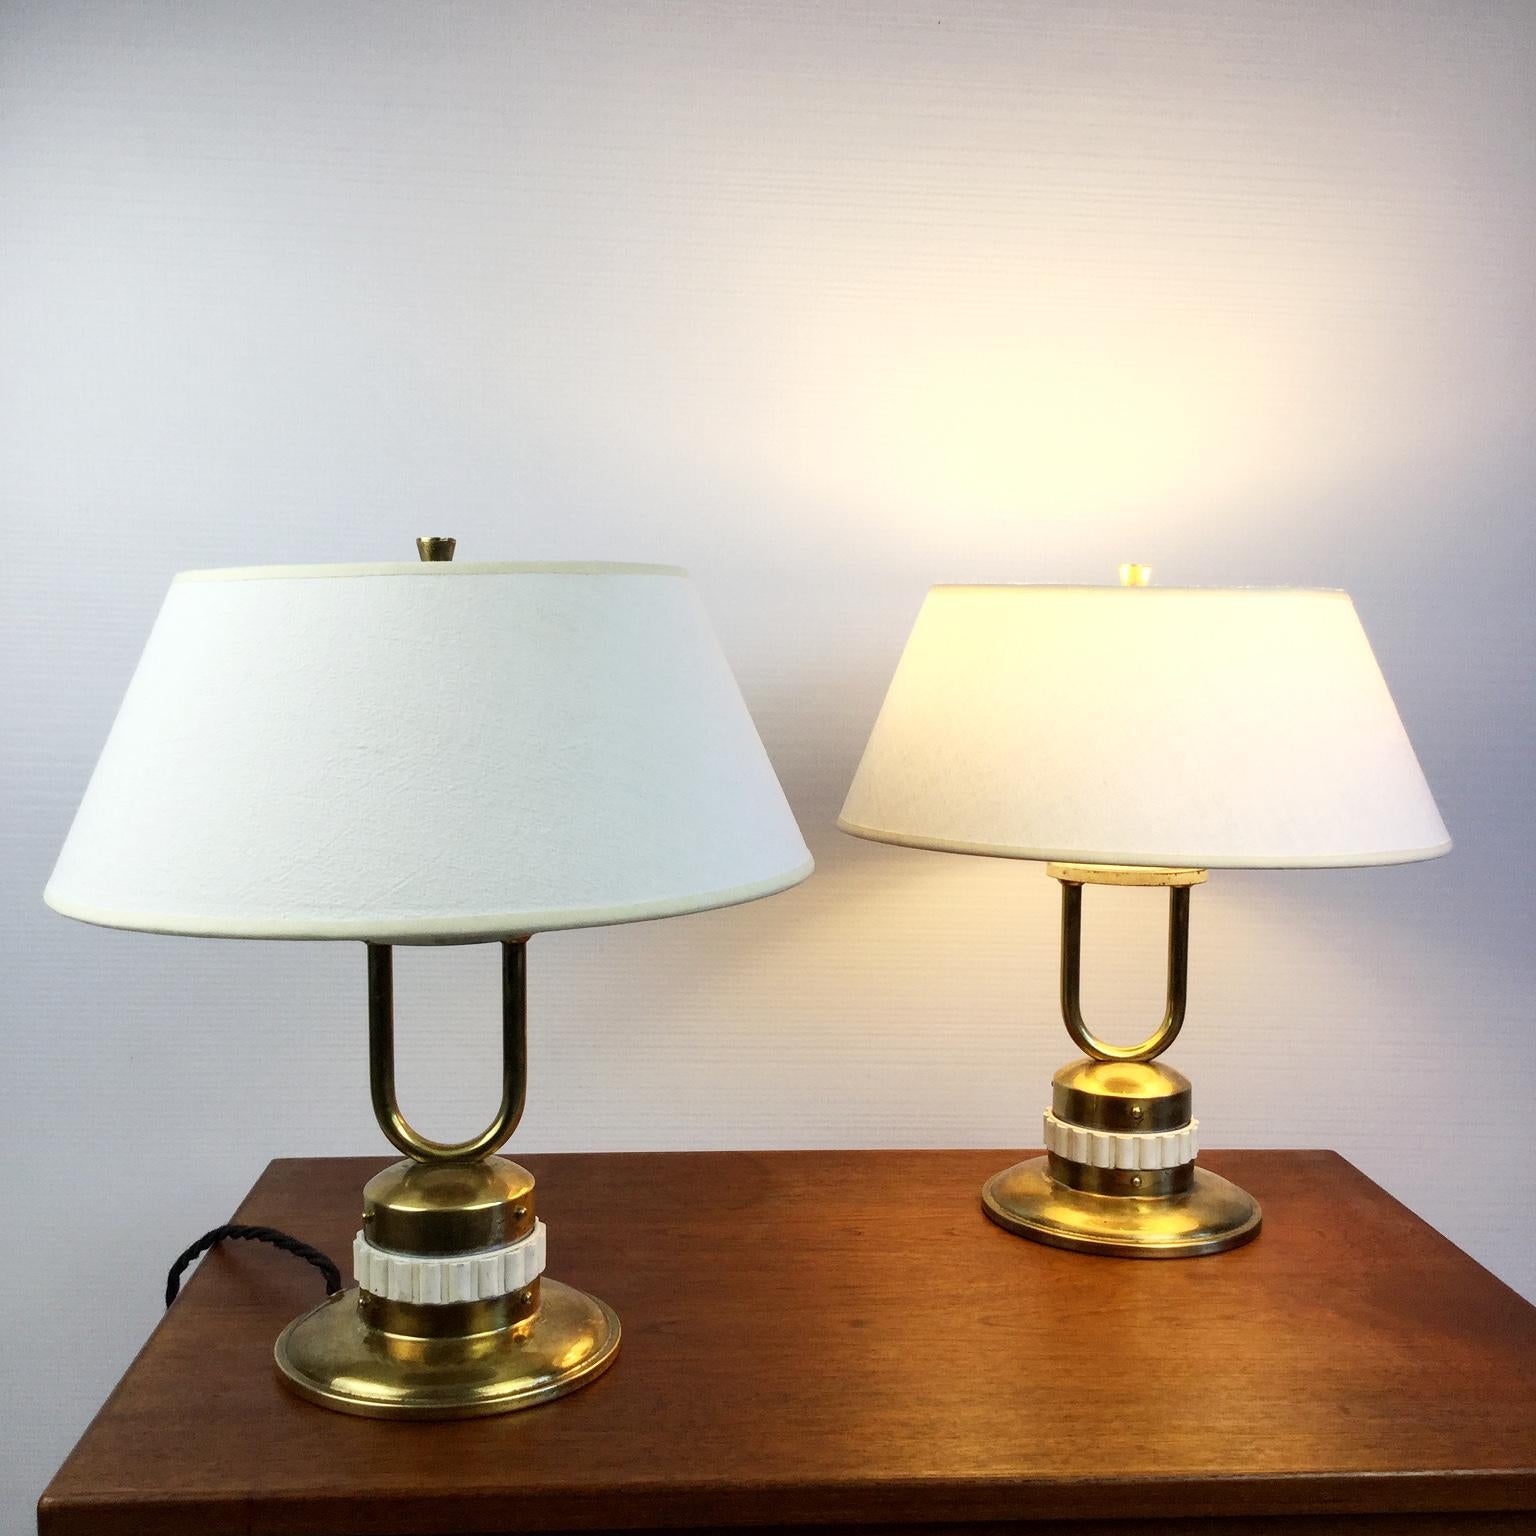 Rare pair of bedside lamps manufactured by Jumo Varilux France (Chevet-Varilux)
This lamp has patented a rotary switch in white bakelite which lits up 1 bulb or 2 bulbs
This bakelite switching ring can be used as a dimmer for normal bulbs
Rewired